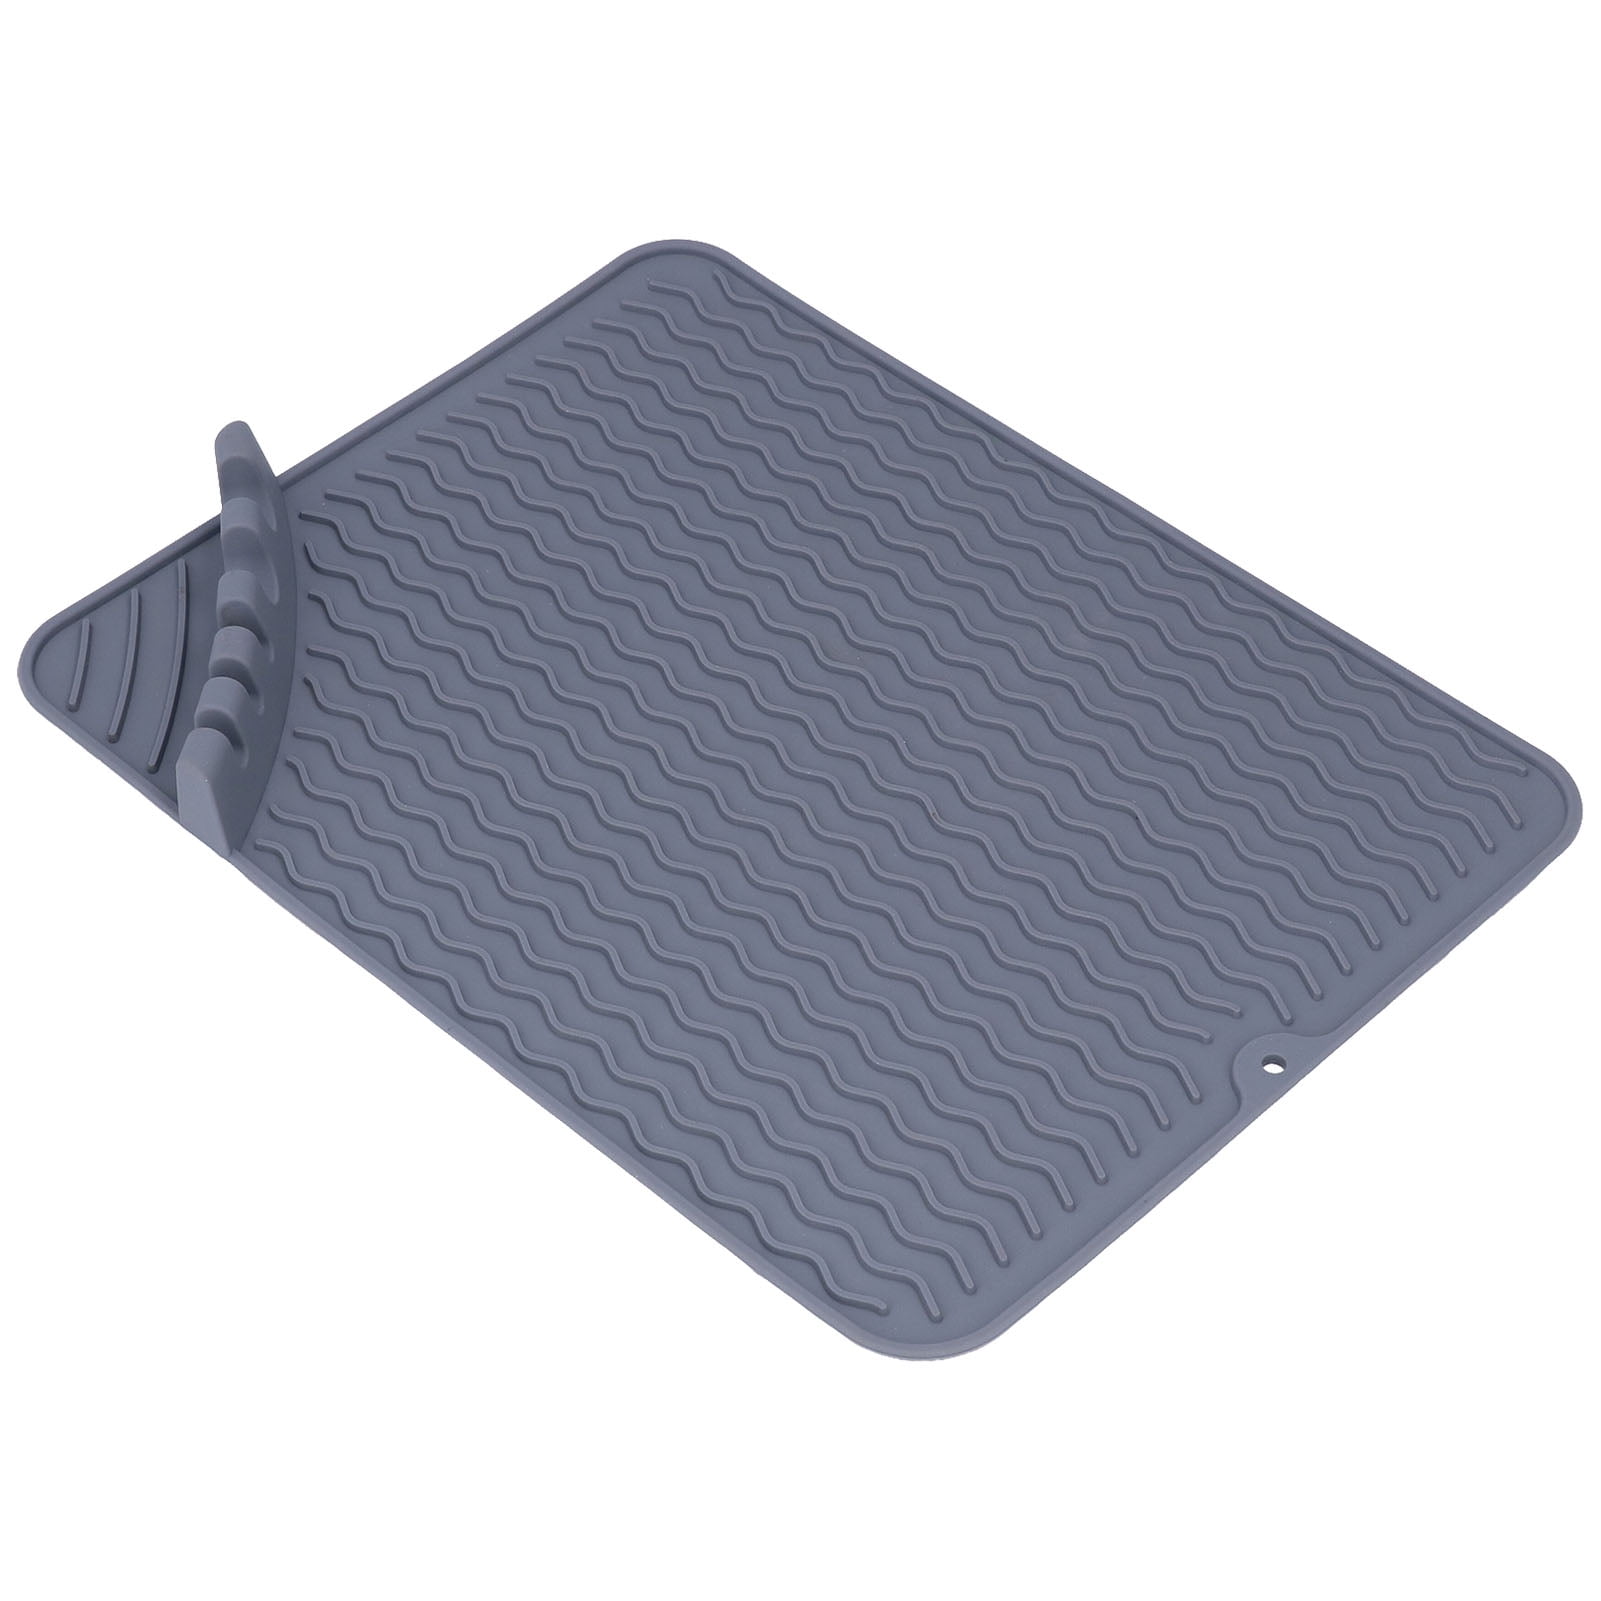 Austok Silicone Dish Drying Mats for Kitchen Counter, Heat